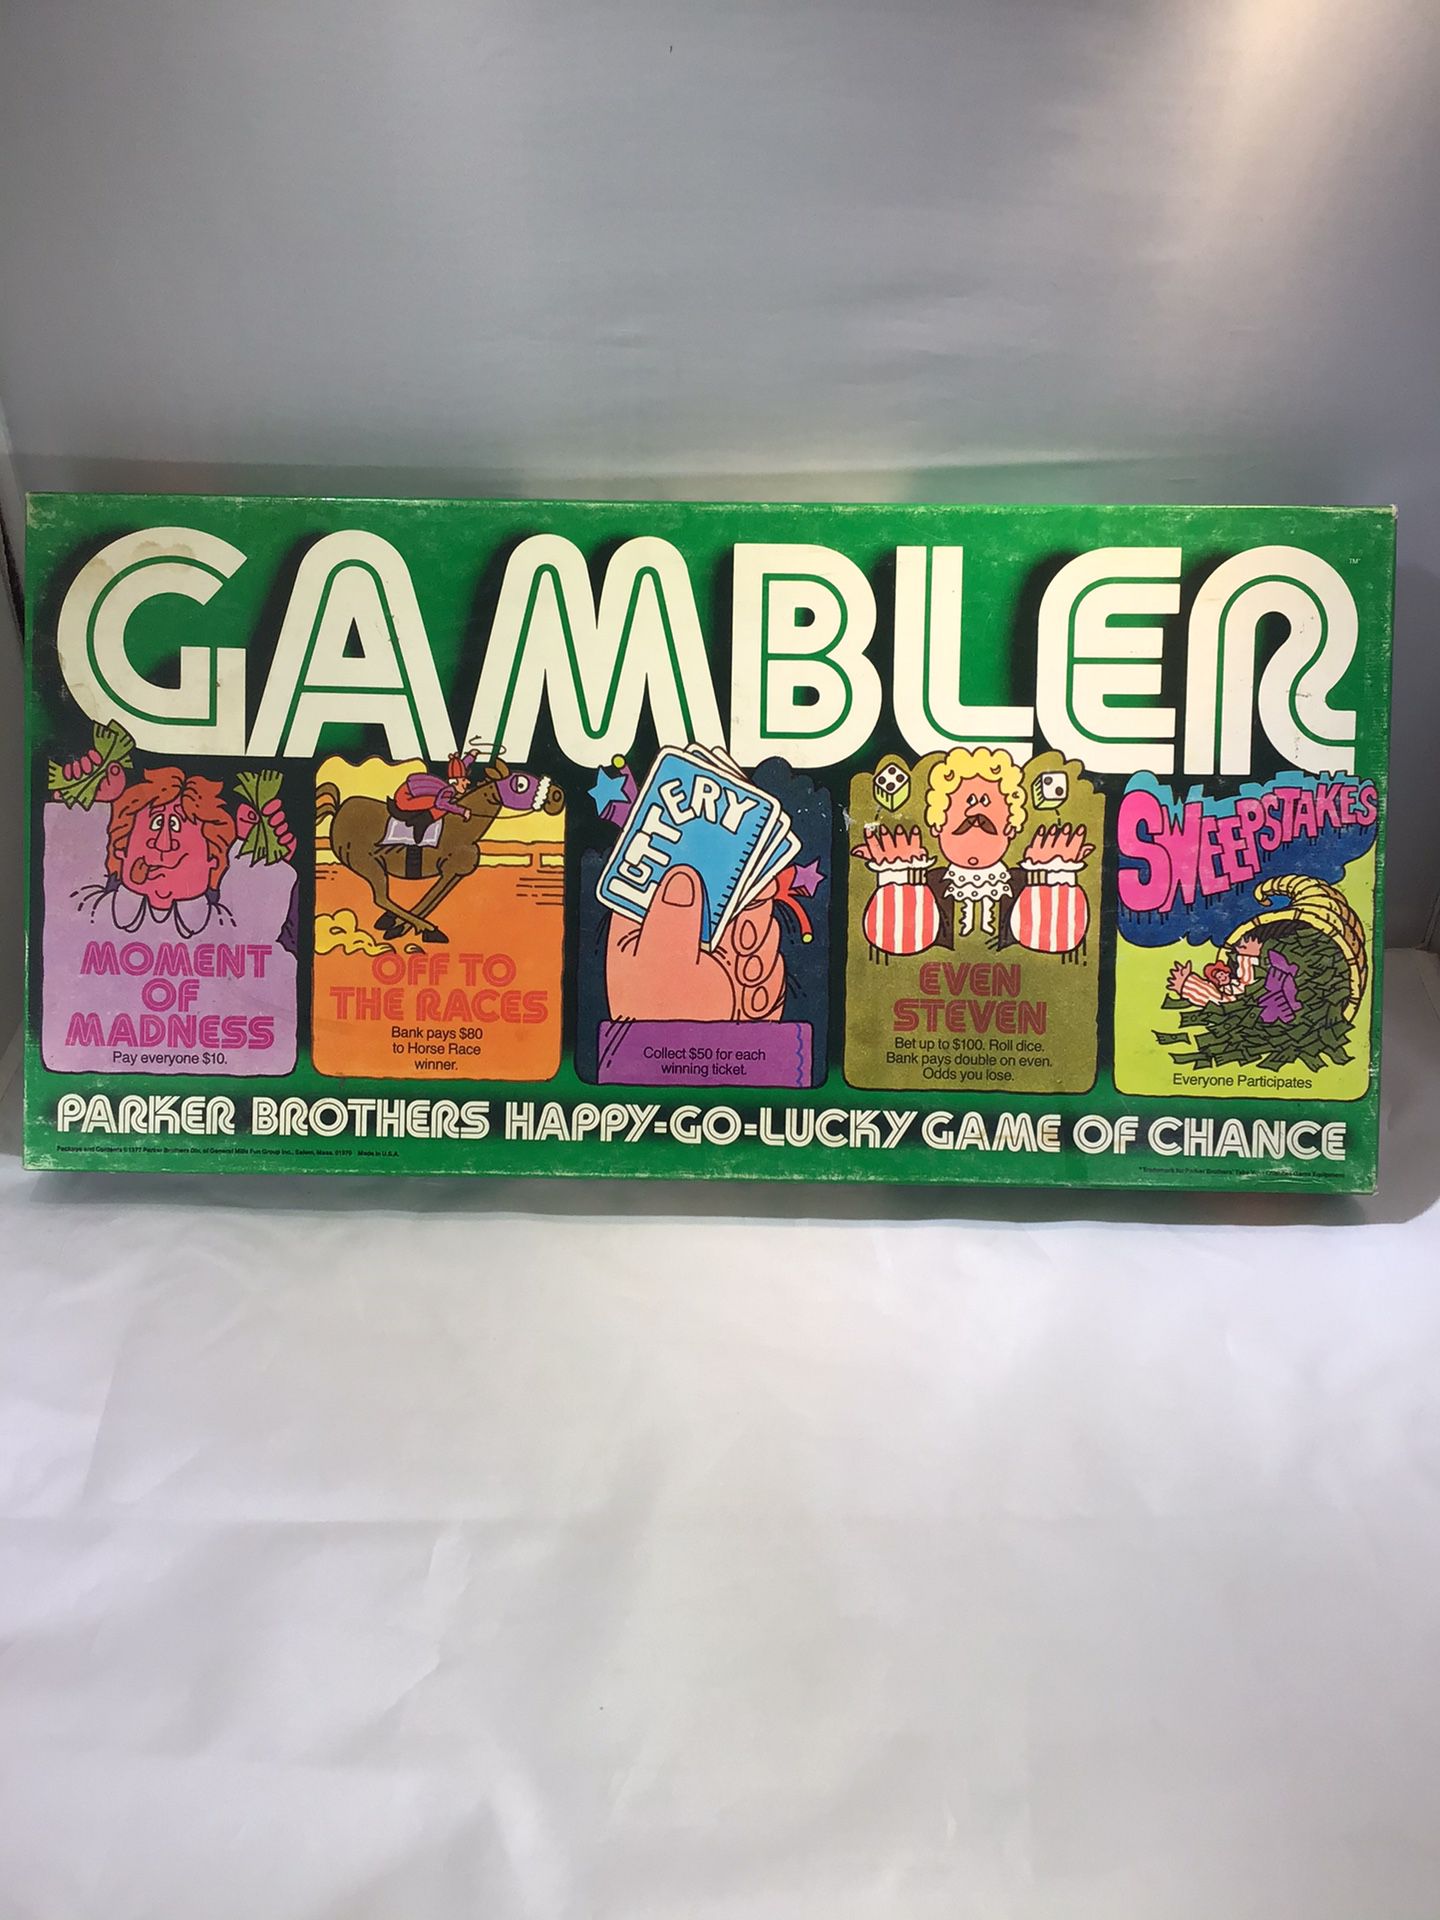 Gambler 1975 by Parker Brothers